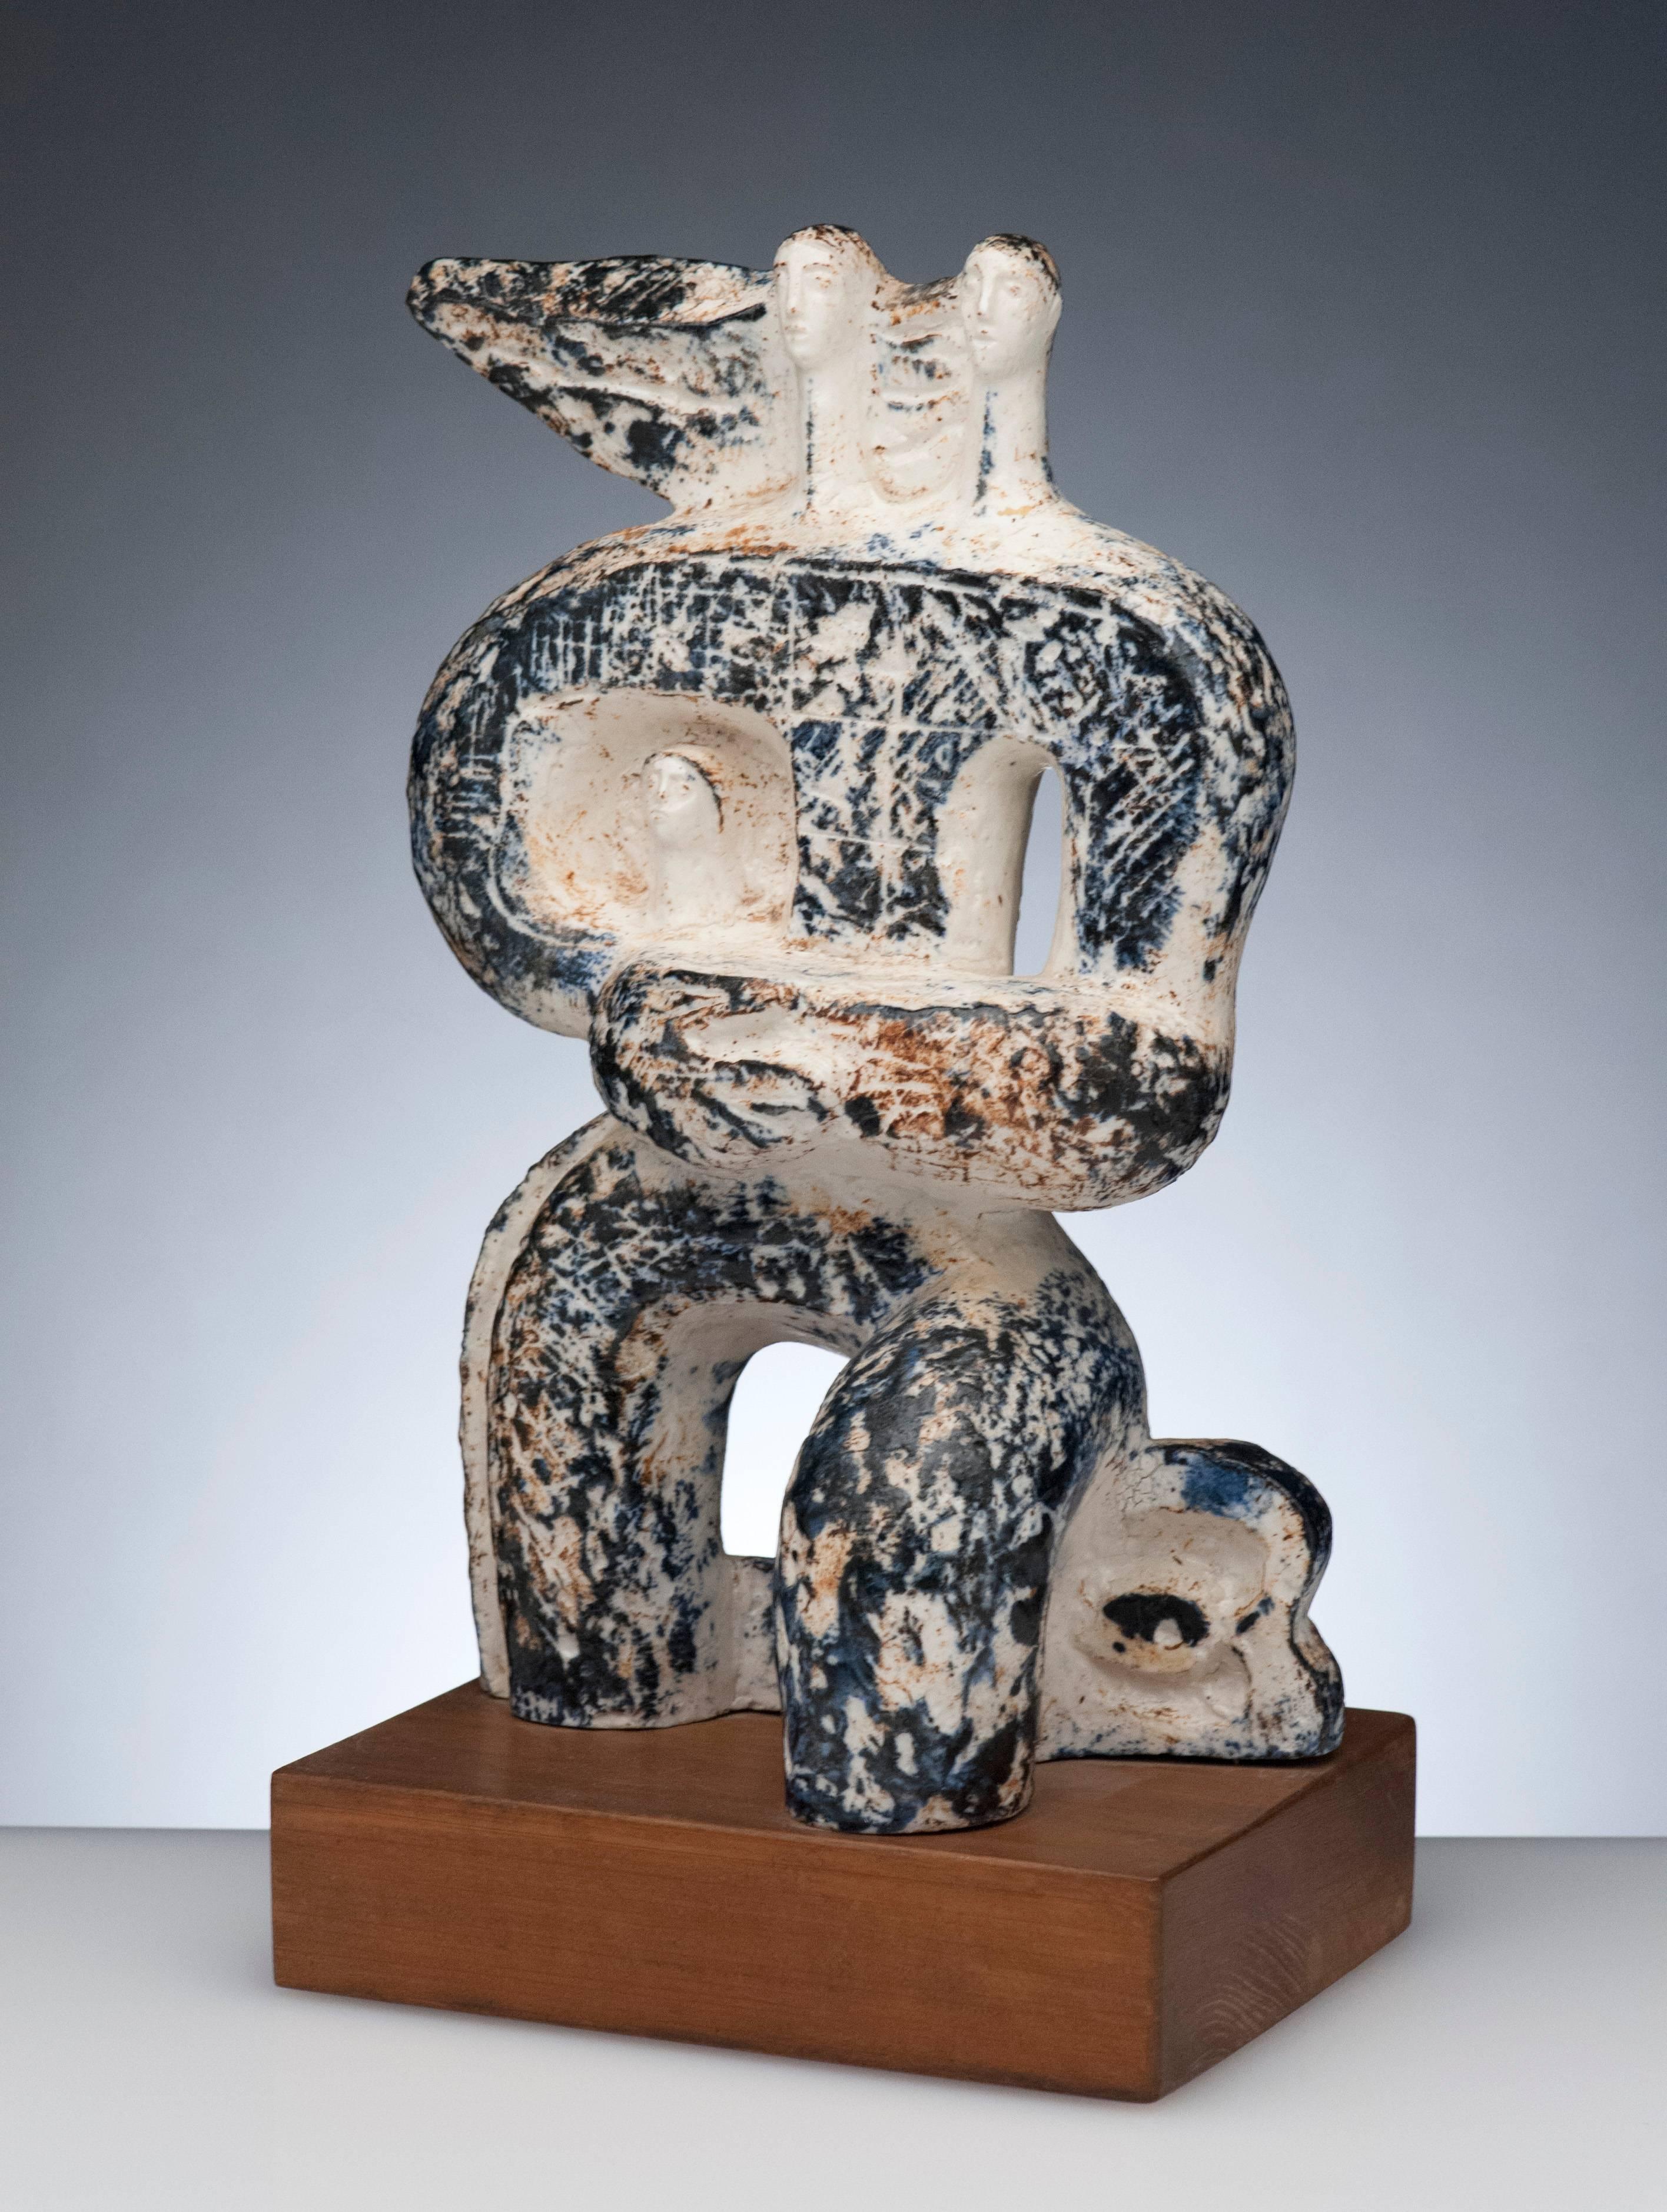 American Art Deco Modern Abstract Figurative Ceramic Sculpture by Arnold Geissbuhler